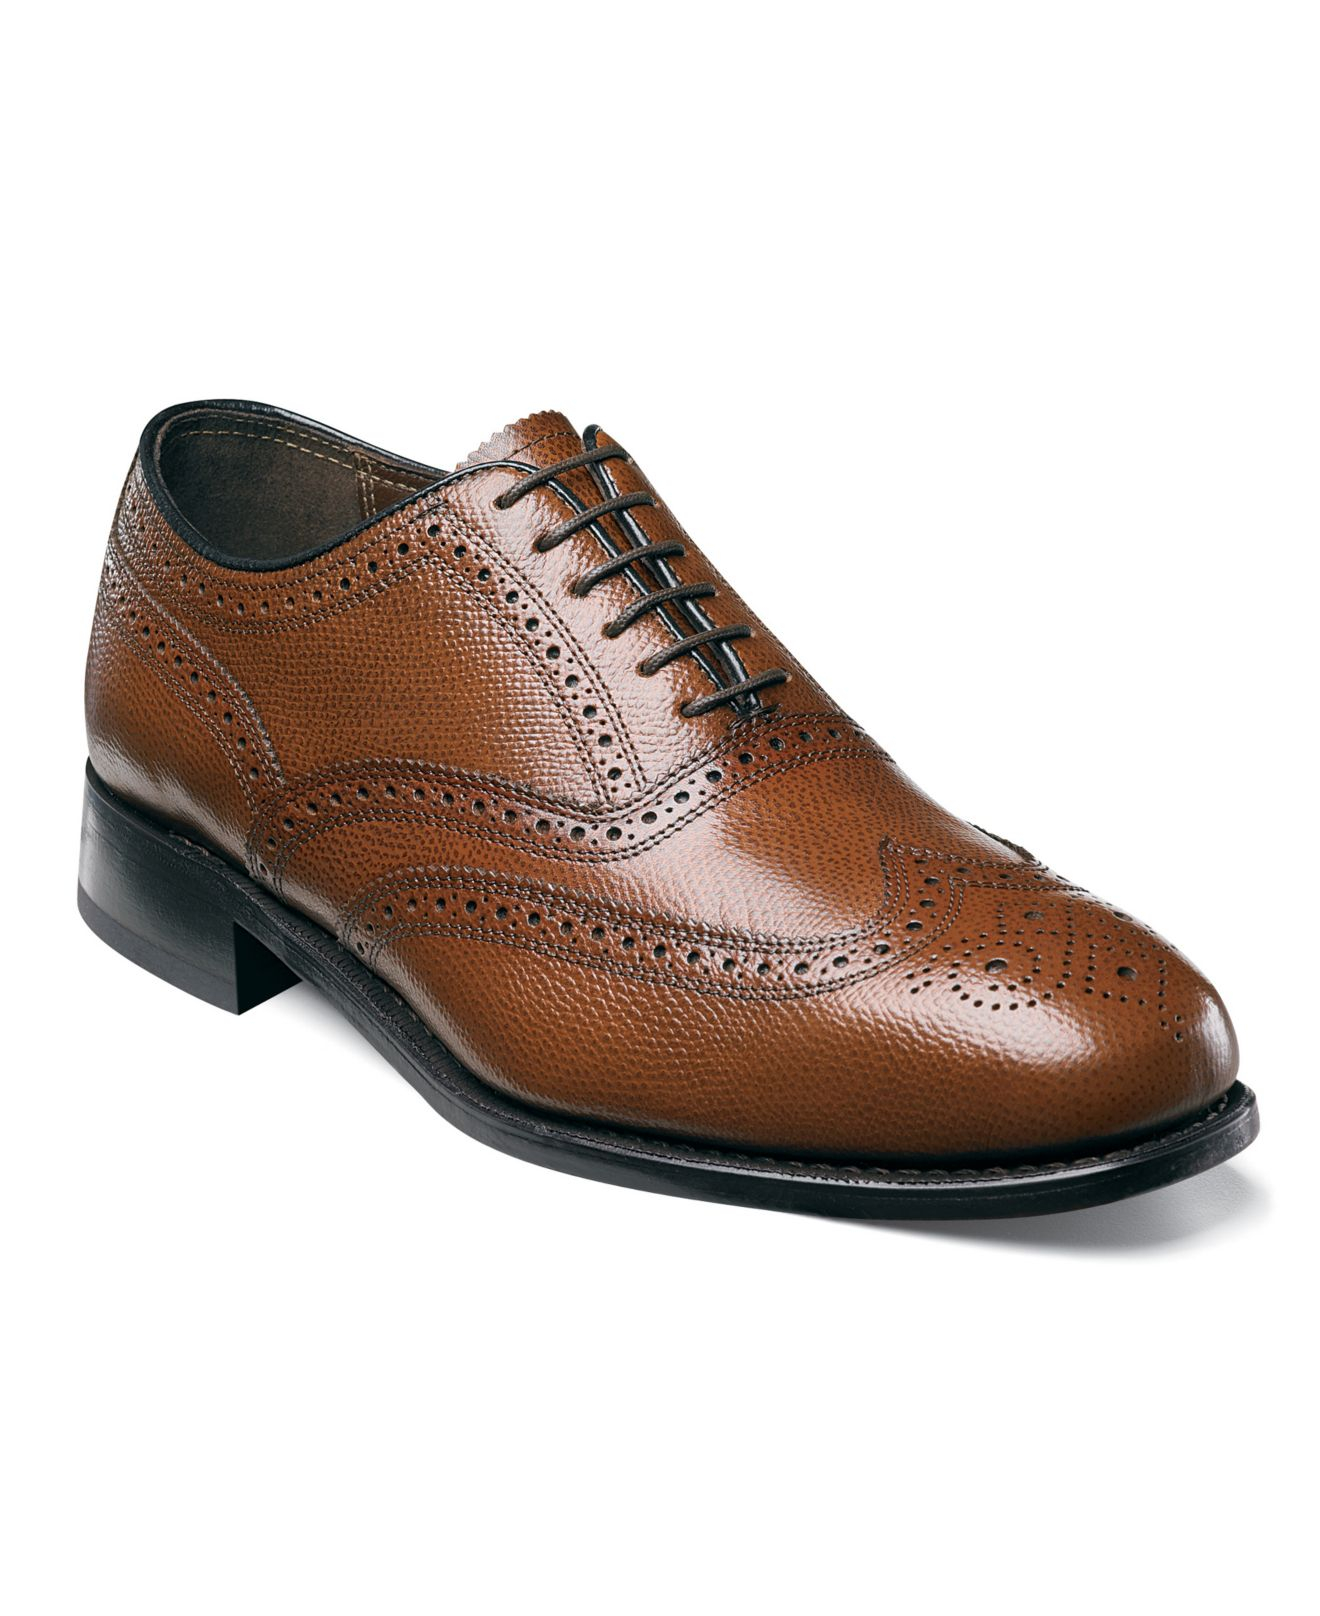 Lyst - Florsheim Lexington Wing-tip Oxford Shoes in Brown for Men